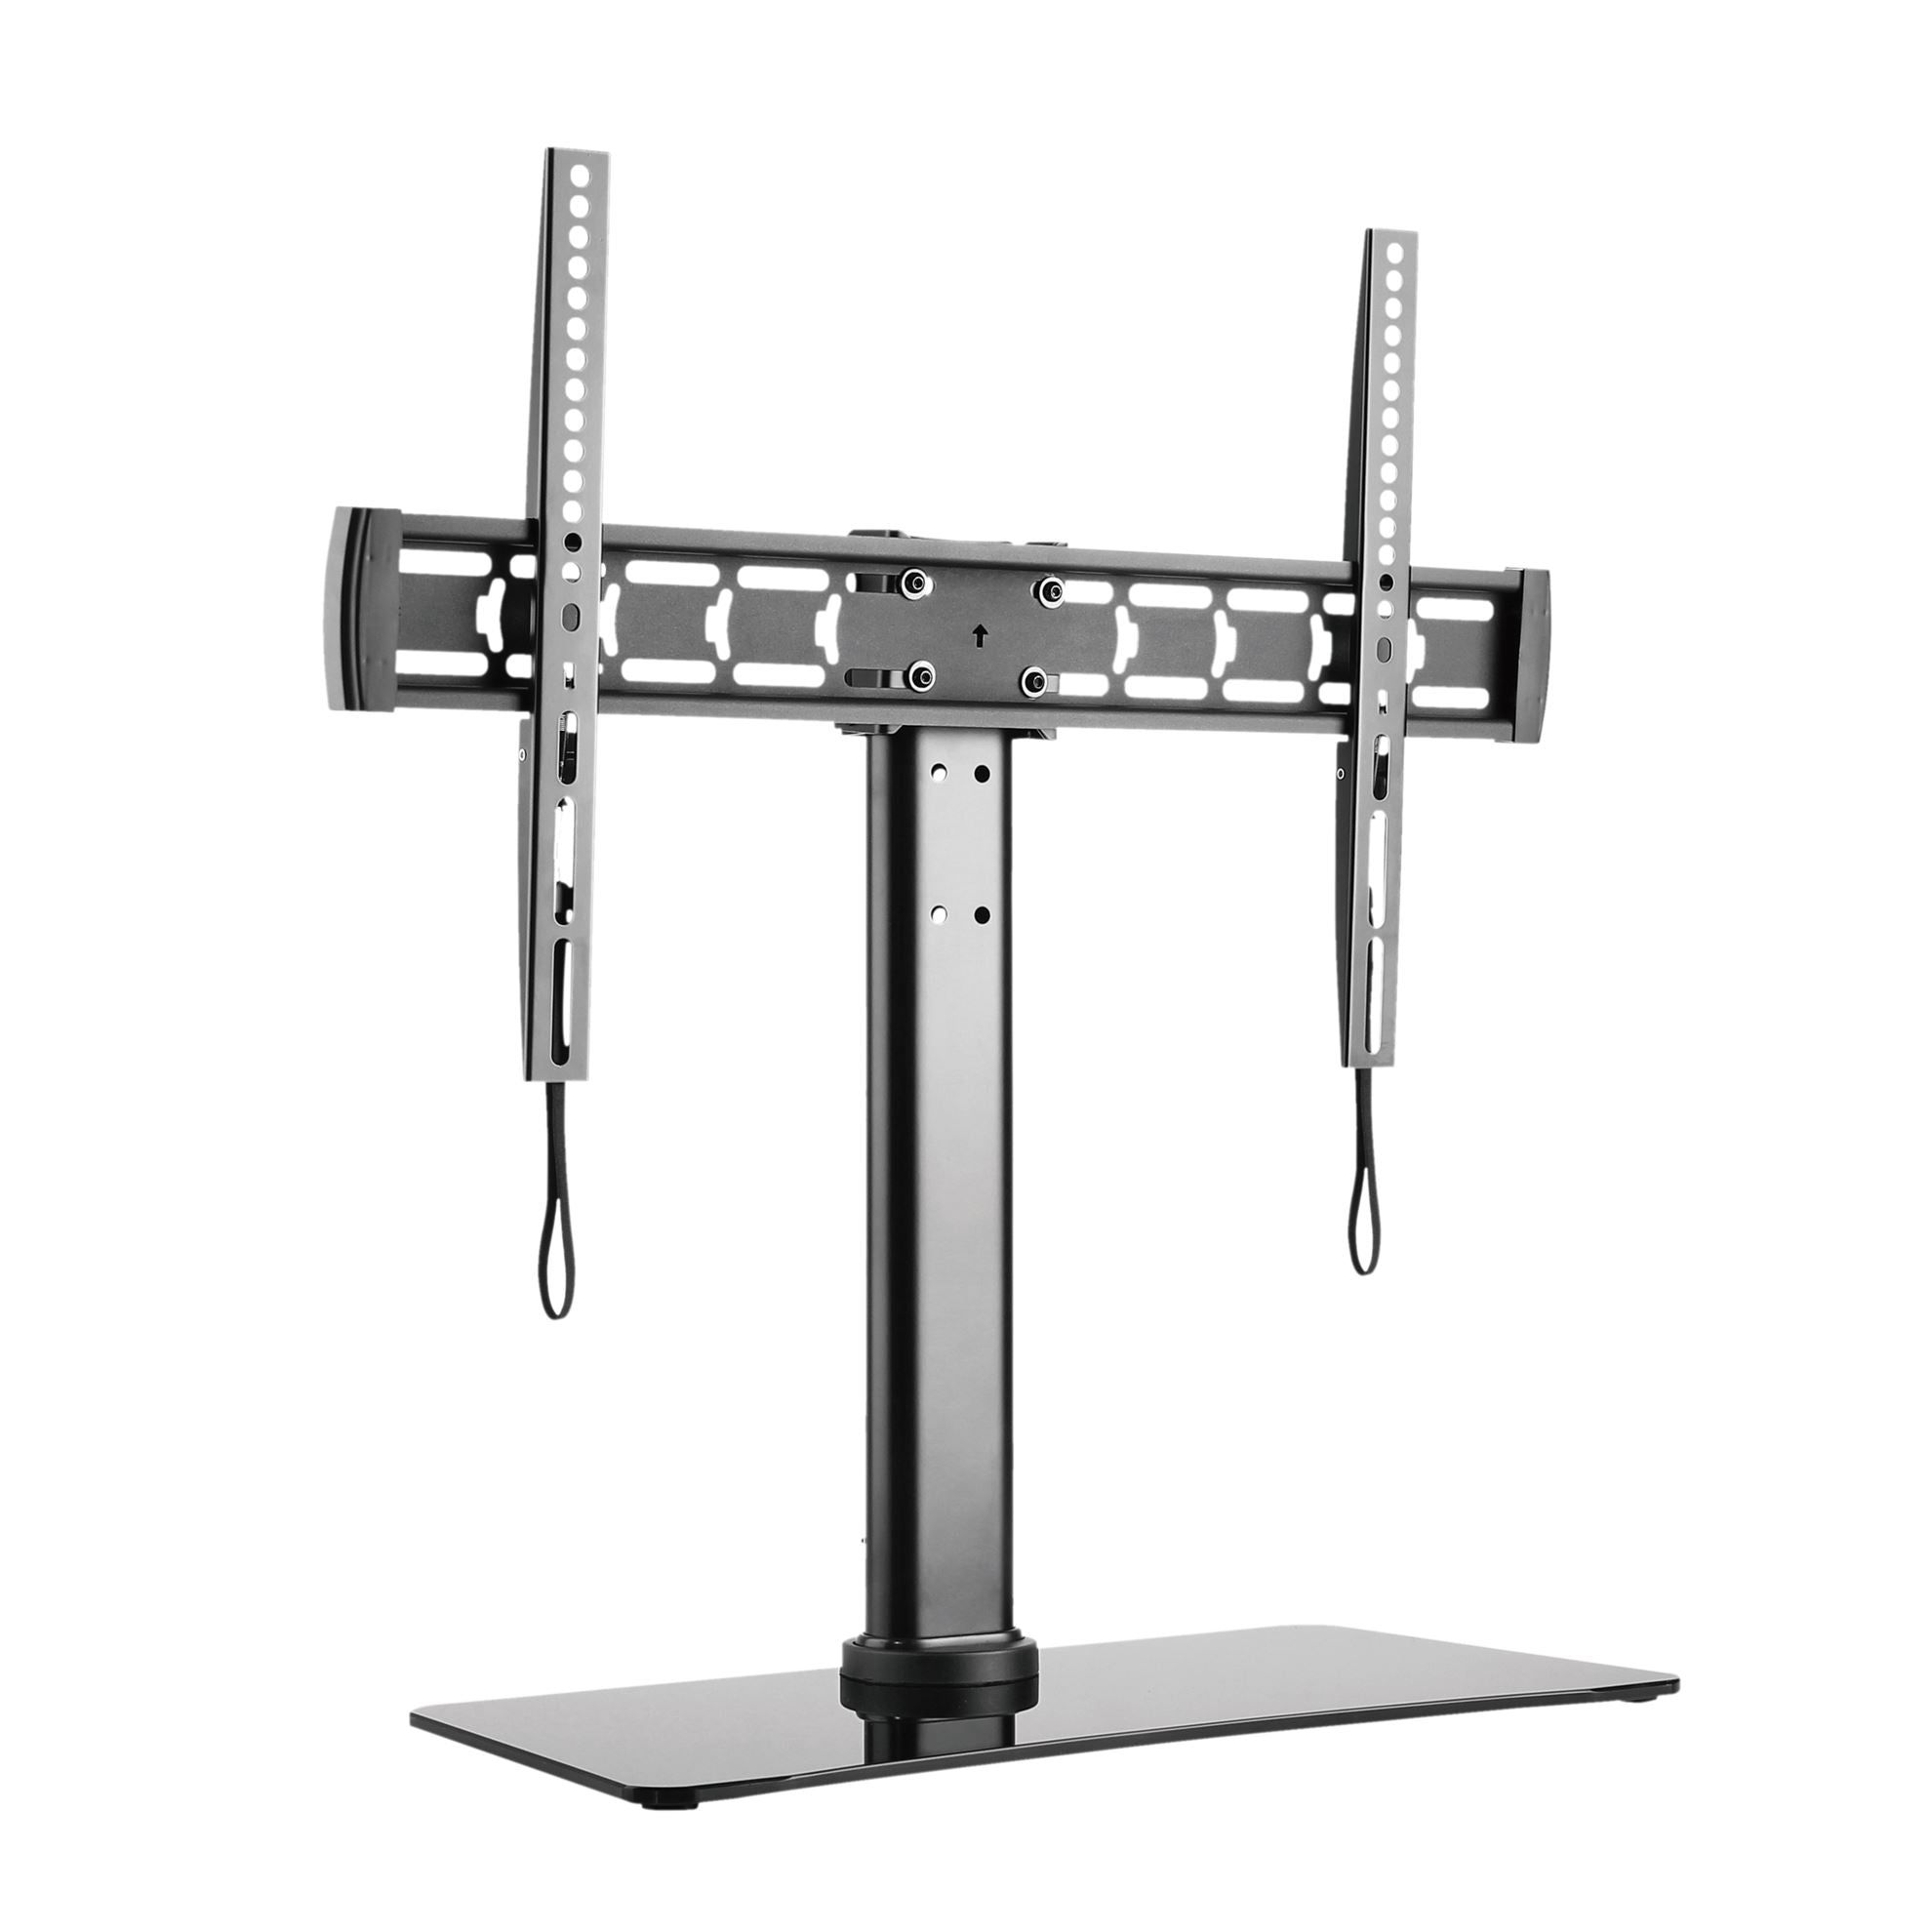 BRATECK 32''-55'' TV Desk Stand with Glass Base. Height Adjustable with Tilt & Rotate. VESA Supports up to 600x400